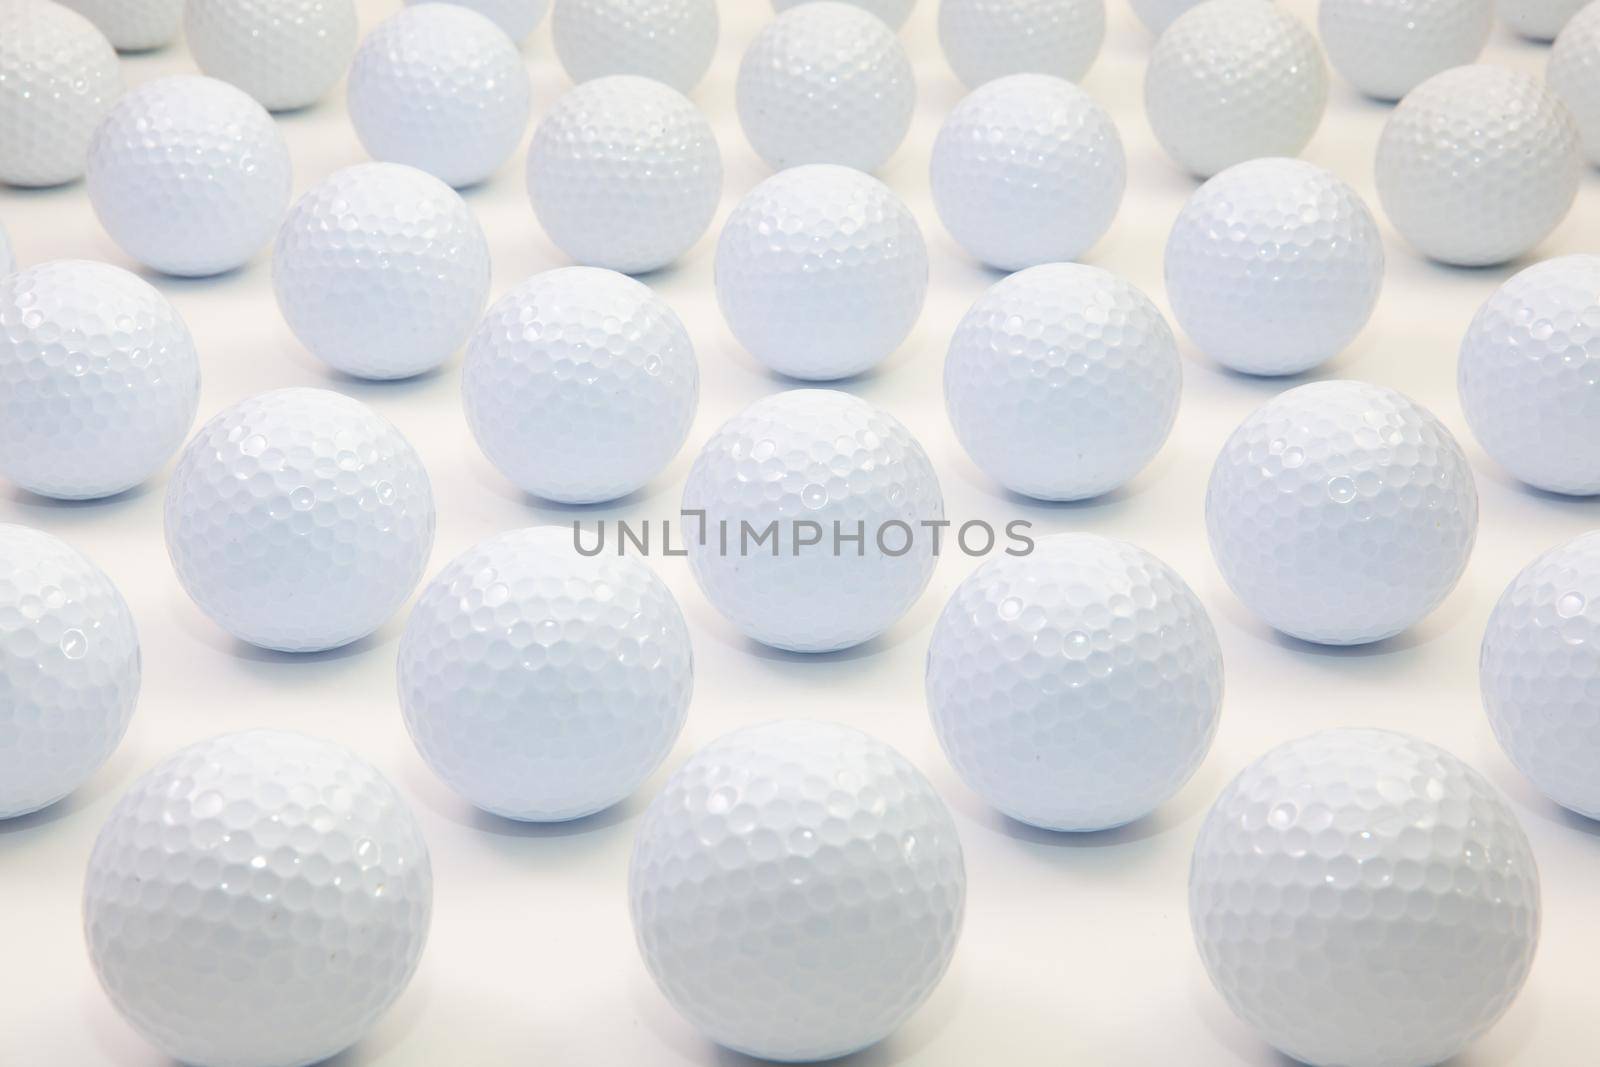 Pattern with white golf balls on the table.